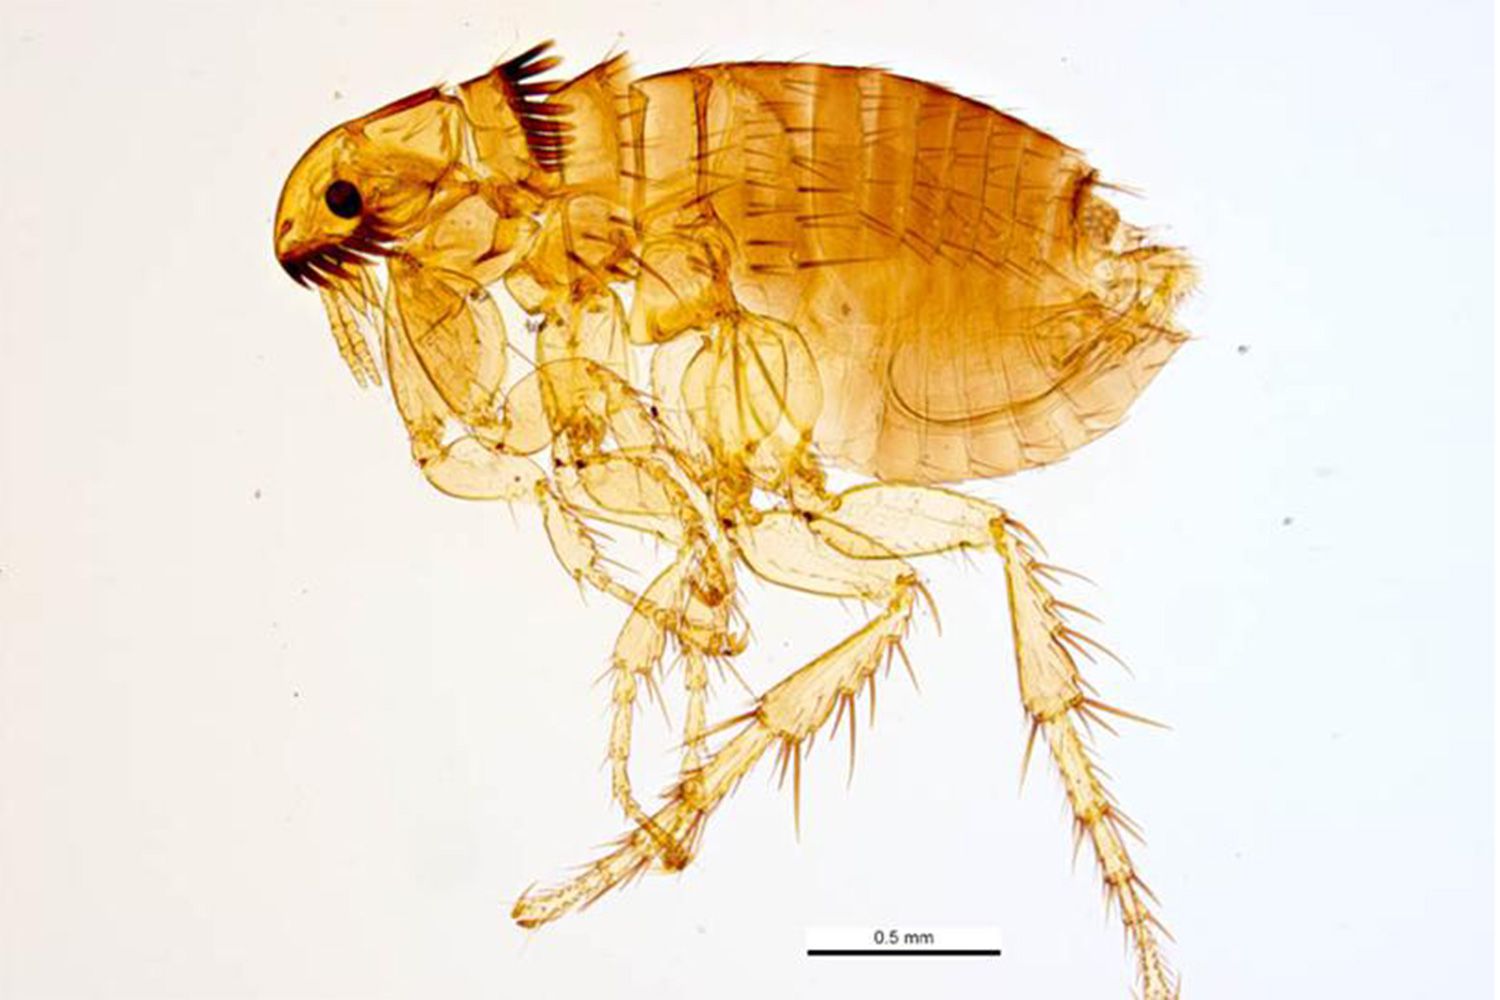 Can Fleas Live on Humans? Can I Get Fleas from My Pet?